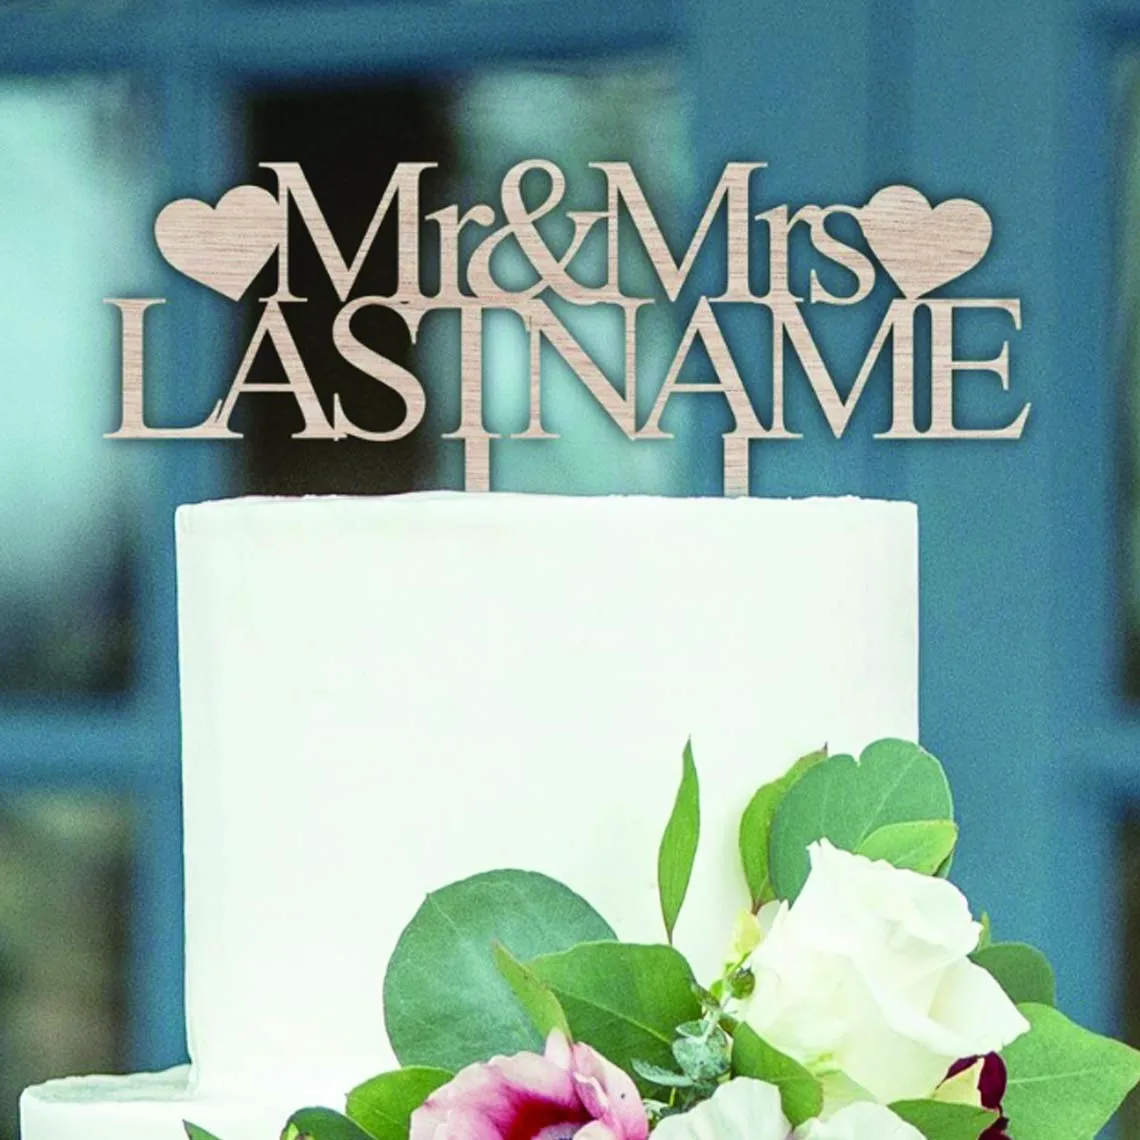 

PERSONALISED WEDDING CAKE TOPPER, WOODEN MR & MRS CAKE TOPPER，PERSONALISED FLORAL BIRTHDAY WOODEN CAKE TOPPER，ANNIVERSARY GIFT.